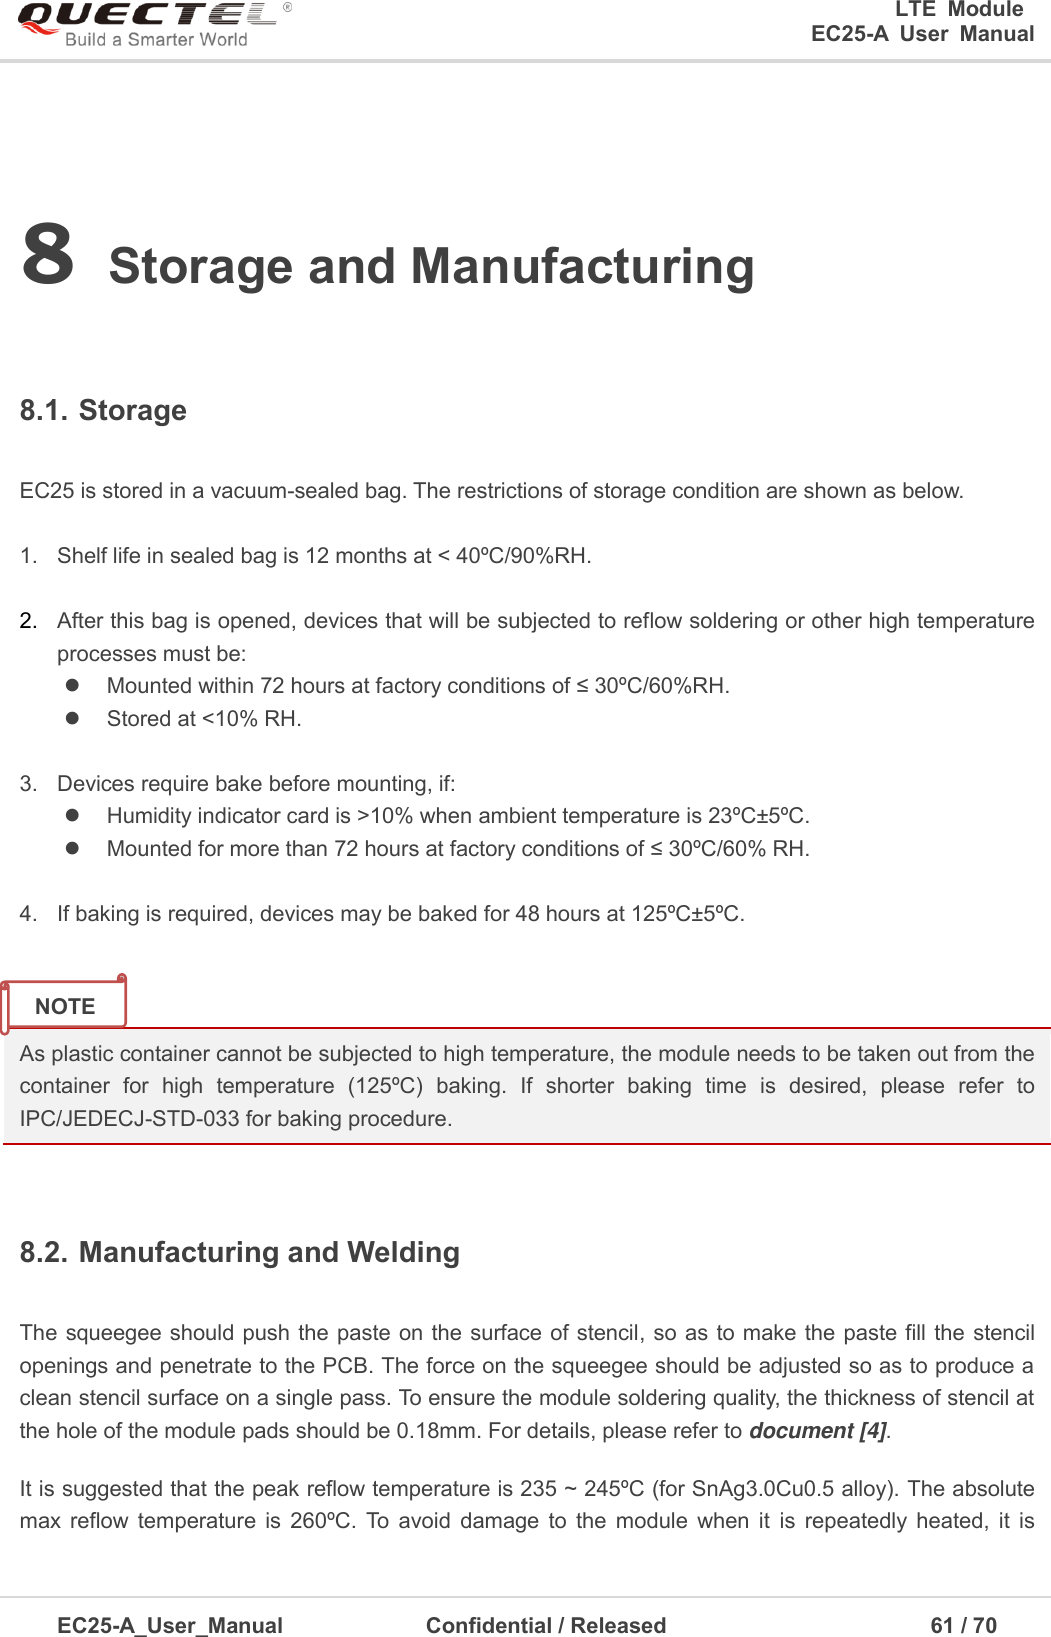 0      LTE  Module      EC25-A  User  Manual EC25-A_User_Manual  Confidential / Released      61 / 7  8 Storage and Manufacturing8.1. Storage EC25 is stored in a vacuum-sealed bag. The restrictions of storage condition are shown as below. 1. Shelf life in sealed bag is 12 months at &lt; 40ºC/90%RH.2. After this bag is opened, devices that will be subjected to reflow soldering or other high temperatureprocesses must be:Mounted within 72 hours at factory conditions of ≤ 30ºC/60%RH.Stored at &lt;10% RH.3. Devices require bake before mounting, if:Humidity indicator card is &gt;10% when ambient temperature is 23ºC±5ºC.Mounted for more than 72 hours at factory conditions of ≤ 30ºC/60% RH.4. If baking is required, devices may be baked for 48 hours at 125ºC±5ºC.As plastic container cannot be subjected to high temperature, the module needs to be taken out from the container  for  high  temperature  (125ºC)  baking.  If  shorter  baking  time  is  desired,  please  refer  to IPC/JEDECJ-STD-033 for baking procedure.   8.2. Manufacturing and Welding The squeegee should push the paste on the surface of stencil, so as to make the paste fill the stencil openings and penetrate to the PCB. The force on the squeegee should be adjusted so as to produce a clean stencil surface on a single pass. To ensure the module soldering quality, the thickness of stencil at the hole of the module pads should be 0.18mm. For details, please refer to document [4]. It is suggested that the peak reflow temperature is 235 ~ 245ºC (for SnAg3.0Cu0.5 alloy). The absolute max  reflow  temperature  is  260ºC.  To  avoid  damage  to  the  module  when  it  is  repeatedly  heated,  it  is NOTE 